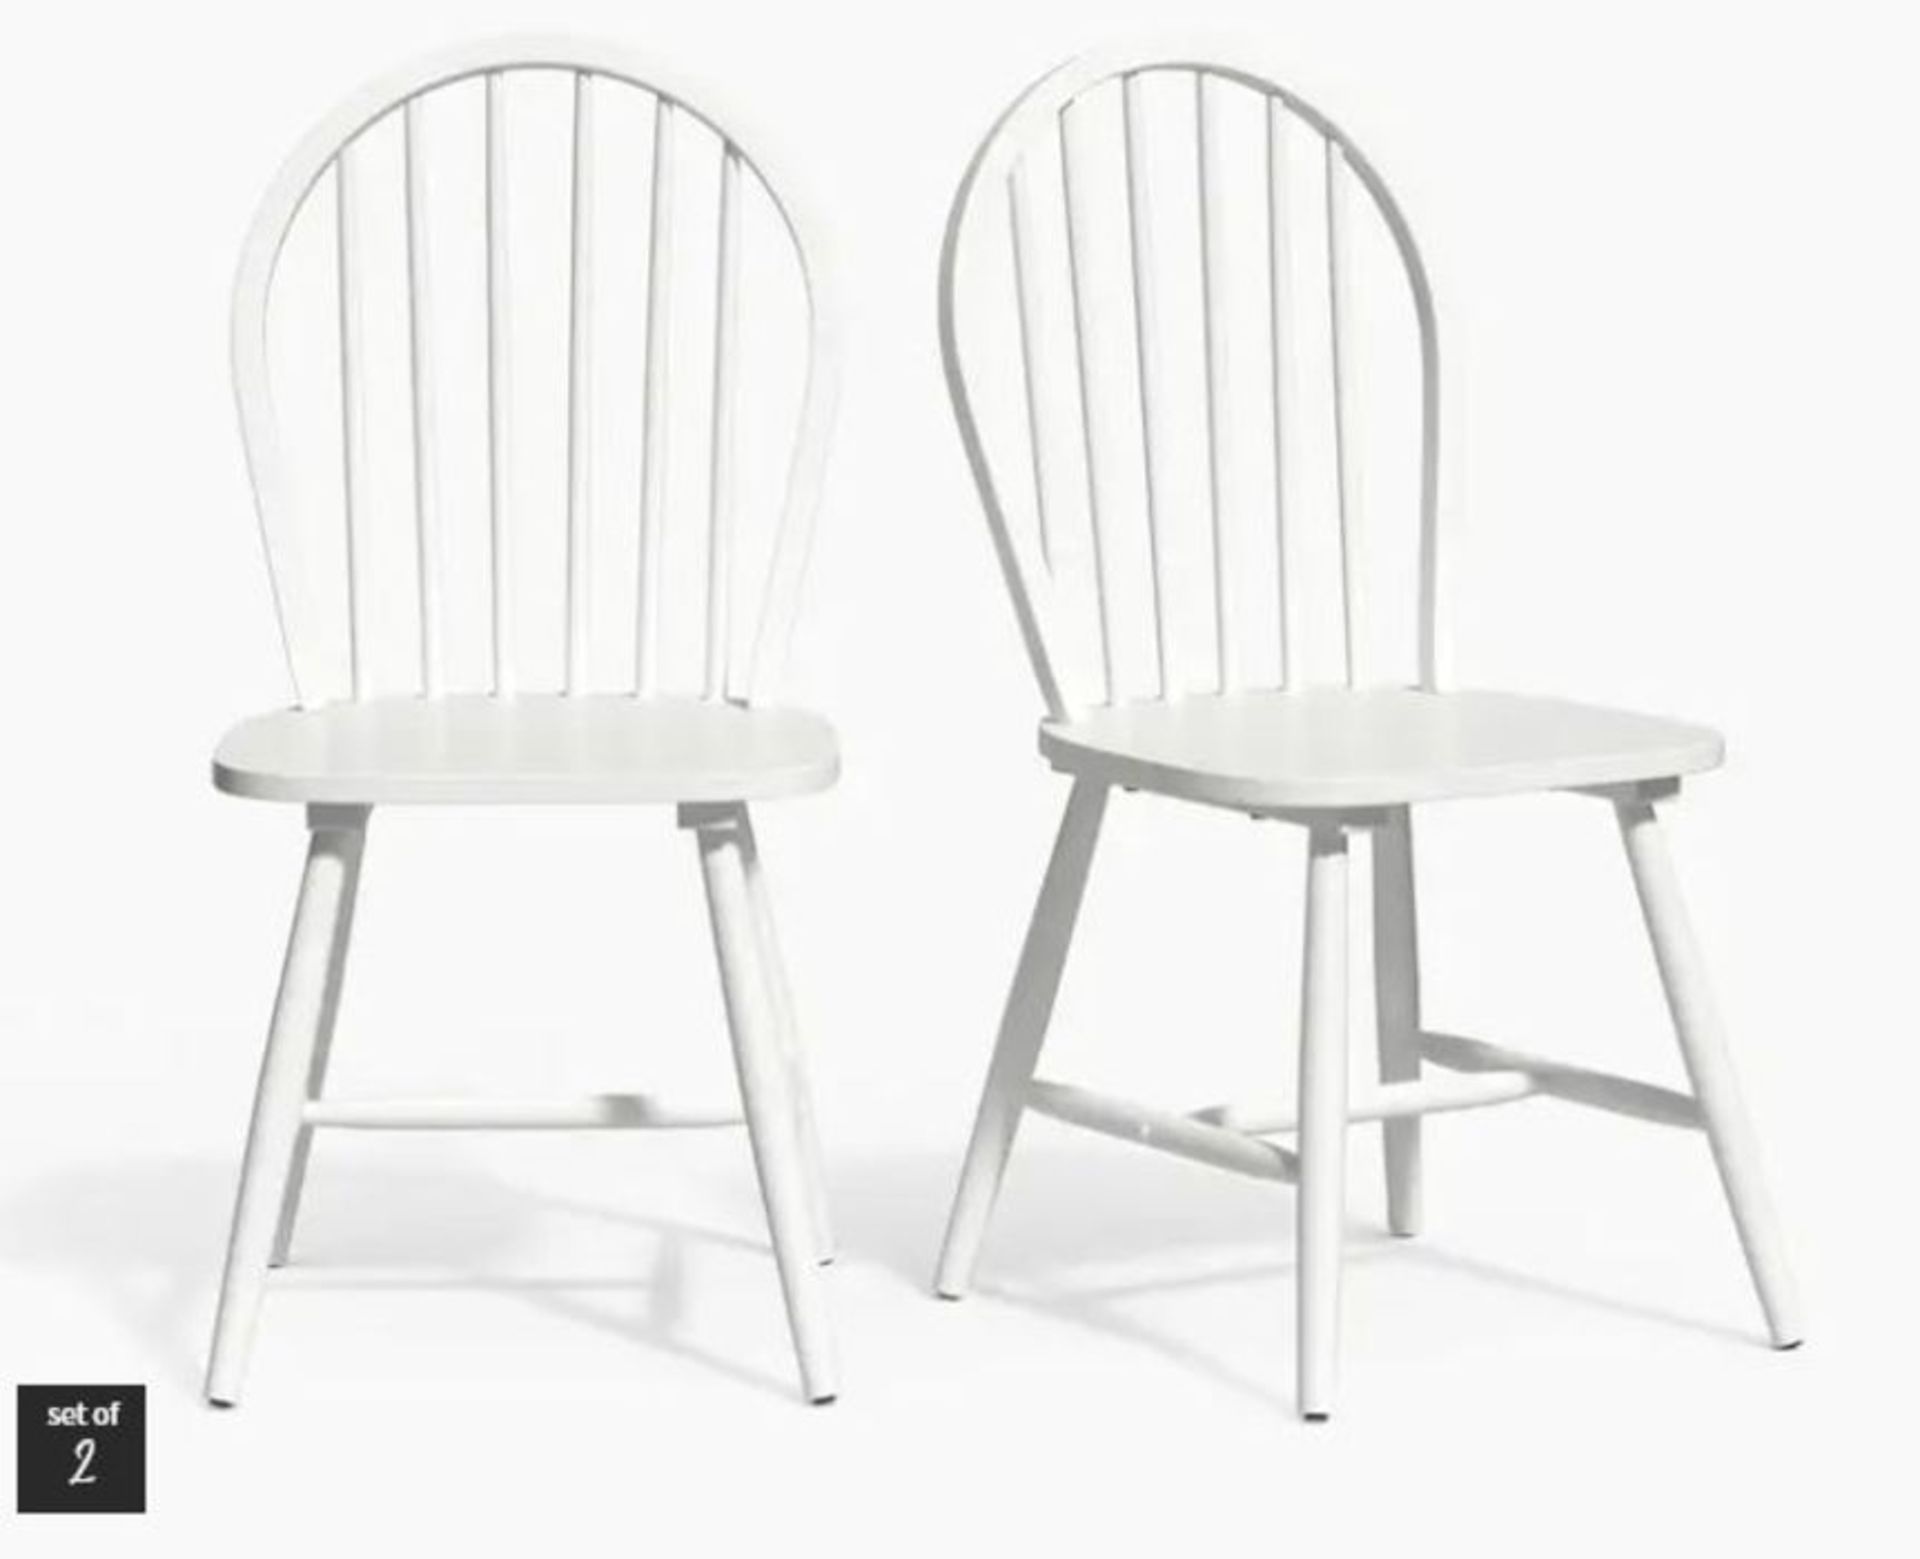 SET OF 2 WINDSOR SPINDLE BACK CHAIRS / RRP £175.00 / CUSOMER RETURN GRADE A